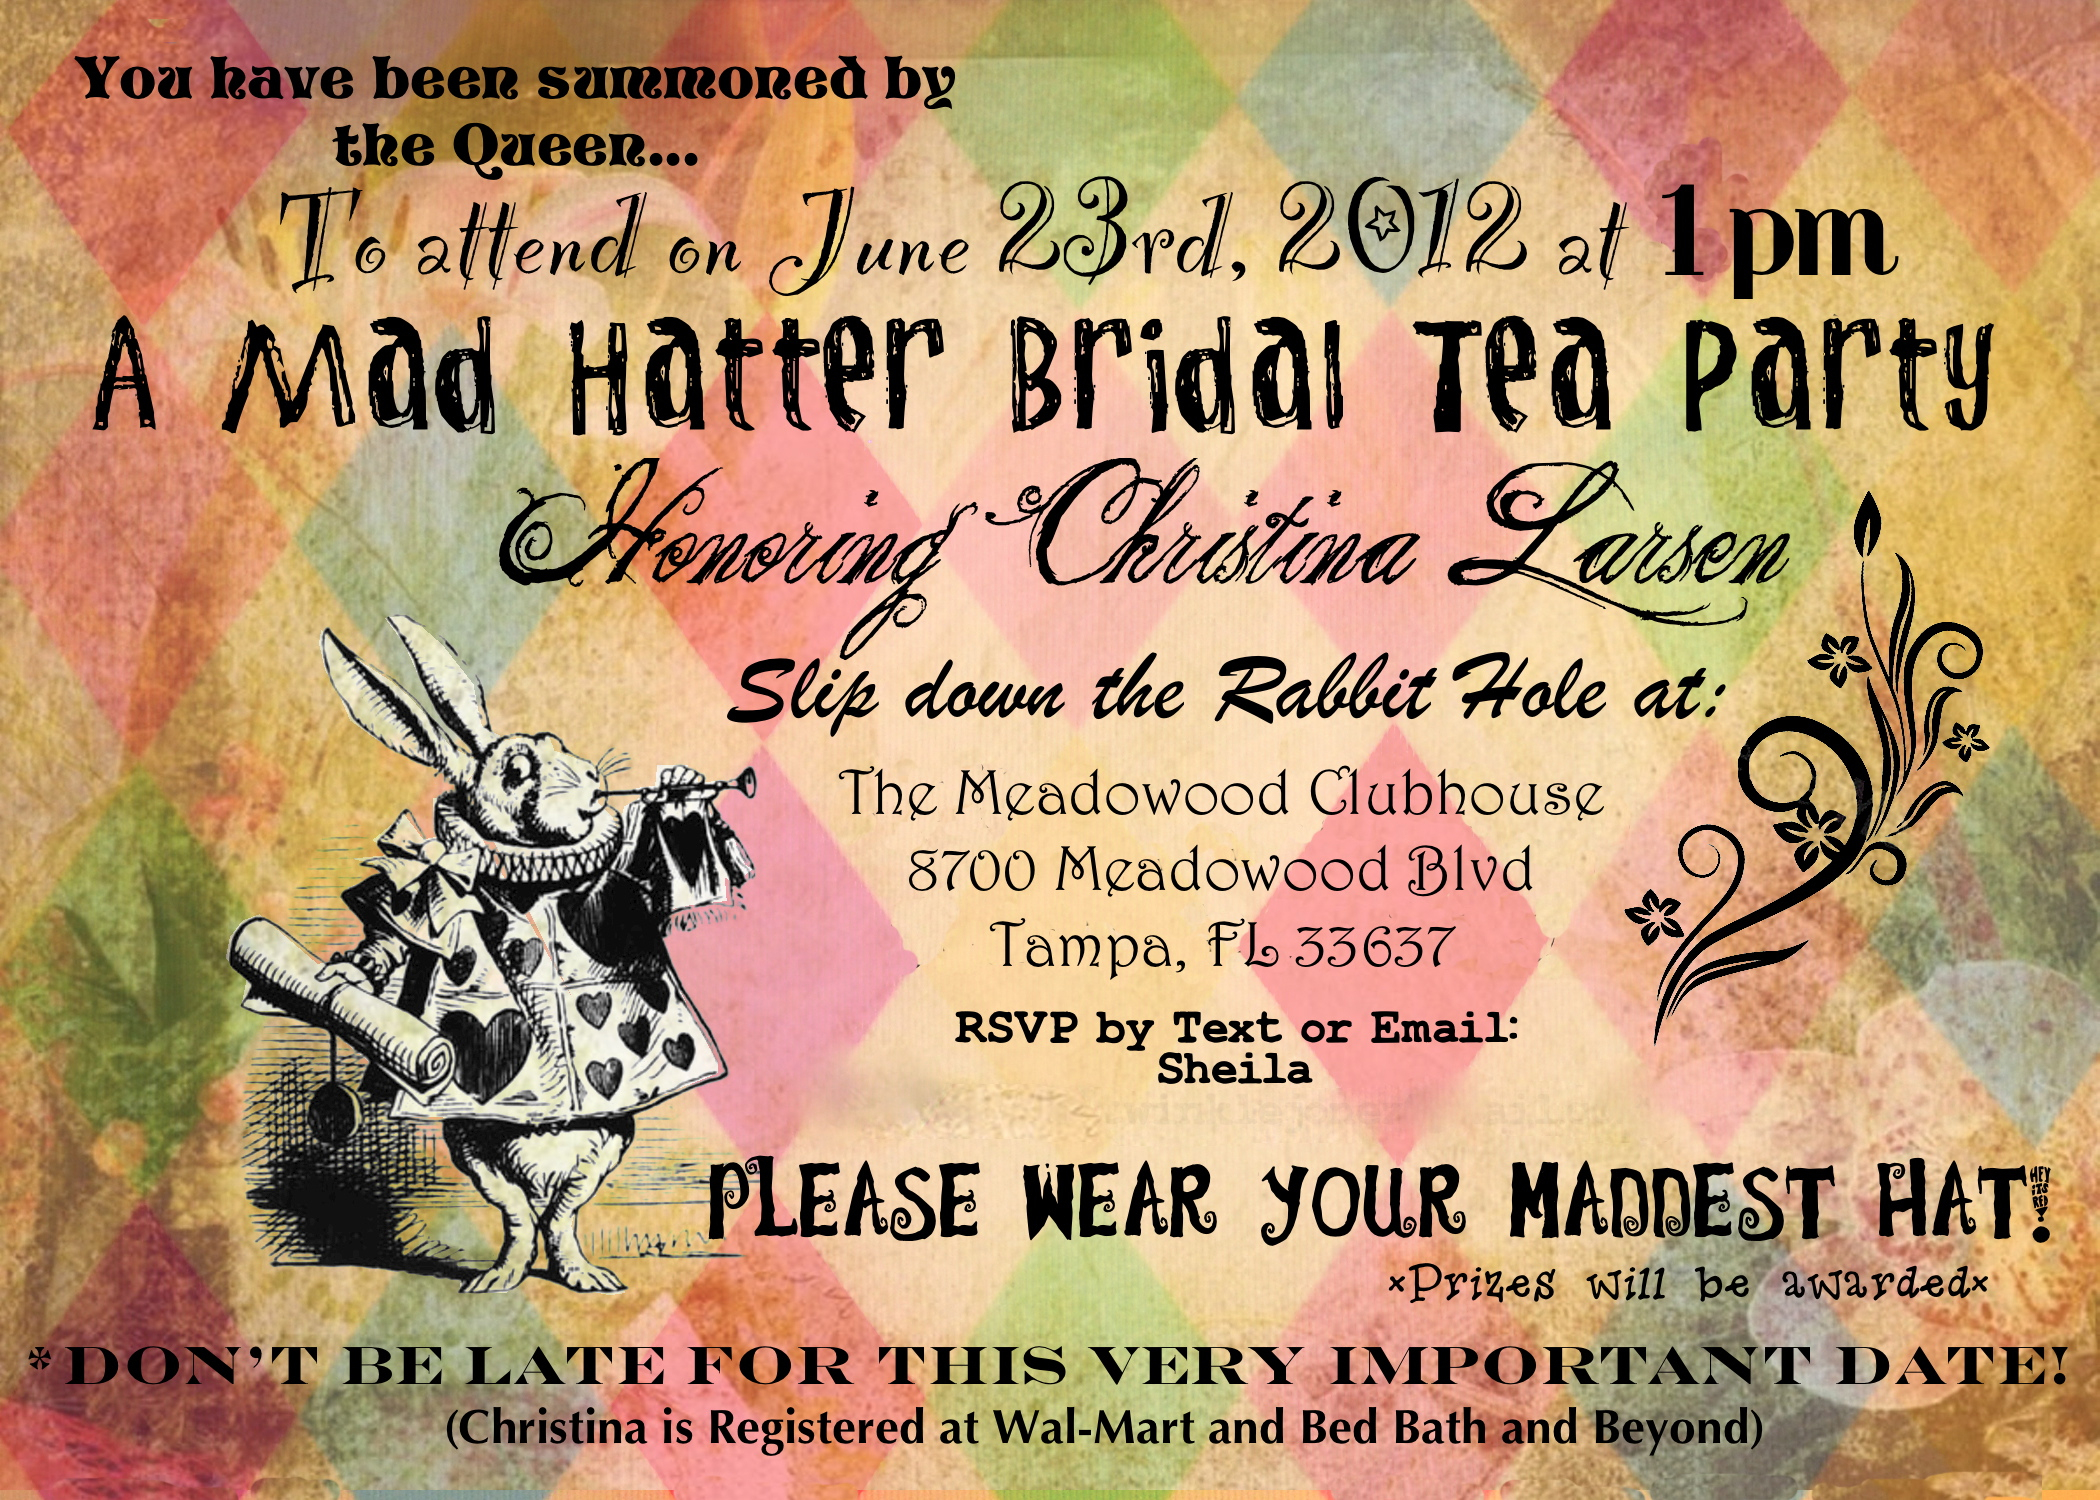 Mad Hatter Tea Party Invitations Mad Hatter Tea Party Invitations - Mad Hatter Tea Party Invitations Free Printable